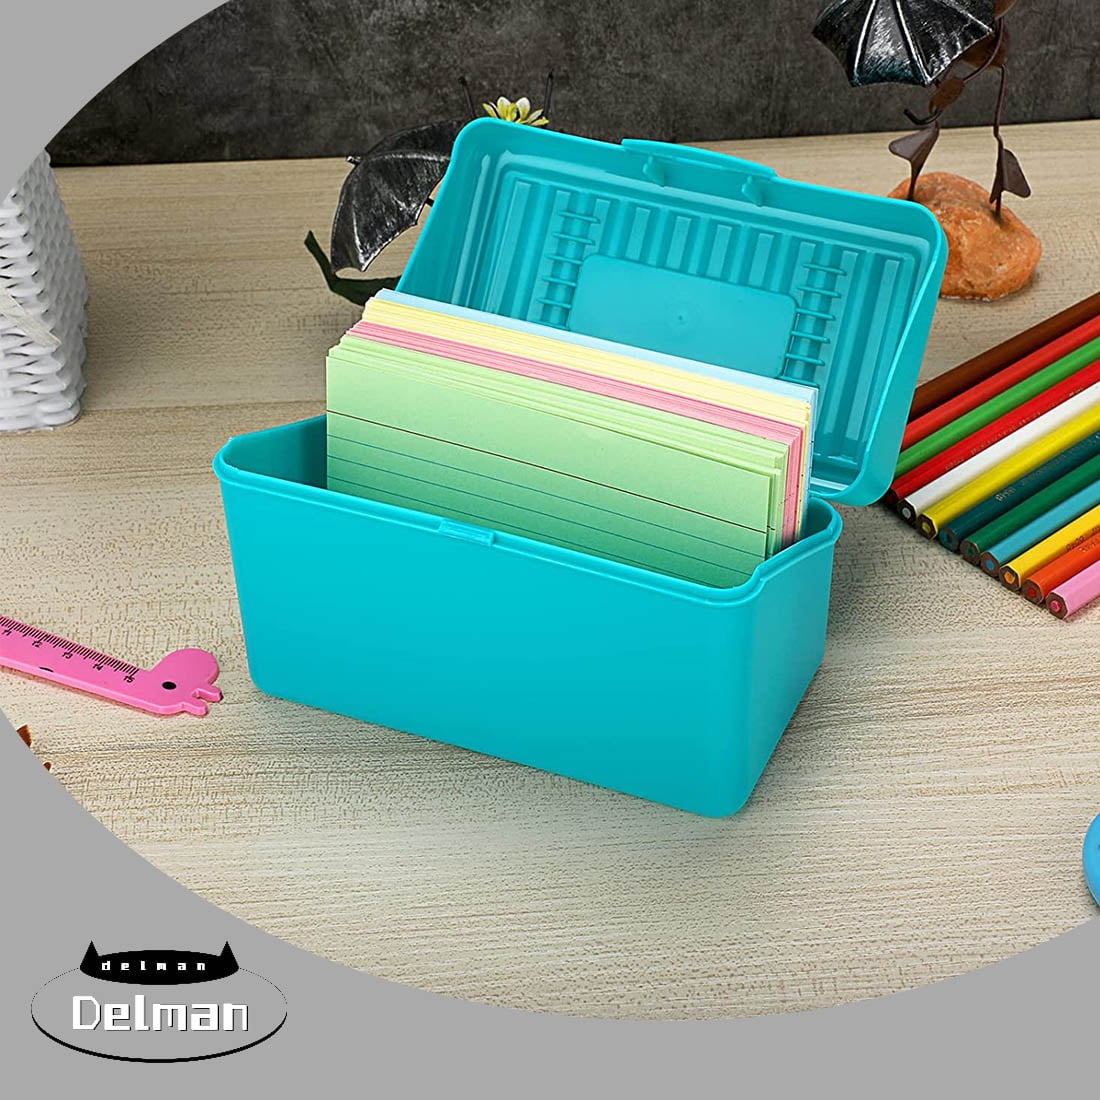 Card Holder 3 x 5 inchRecipe Card Box Plastic Storage Organizer for Filling 350 to 400 Notecards, Addresses & Recipes4 Colors (3 x 5 inch) Office Pro